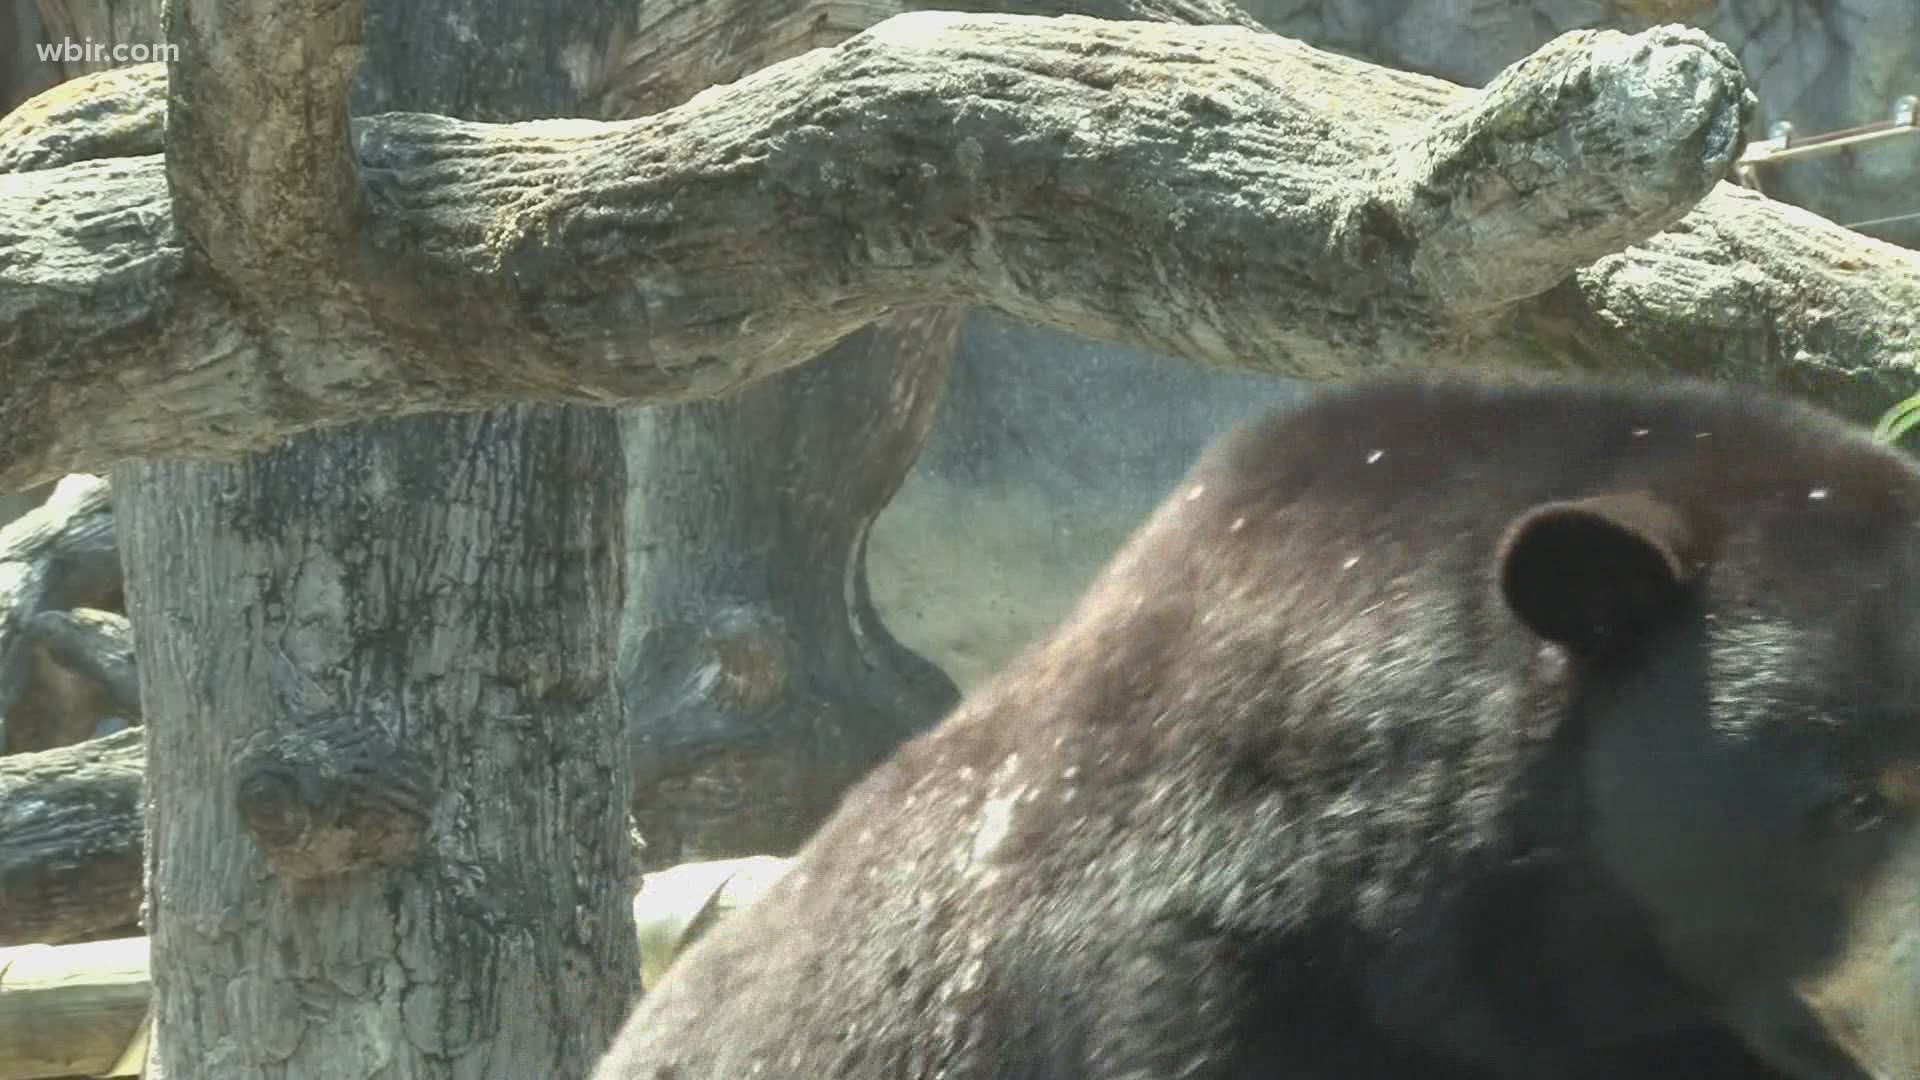 Experts said more sightings are an indication that bear populations could be growing.